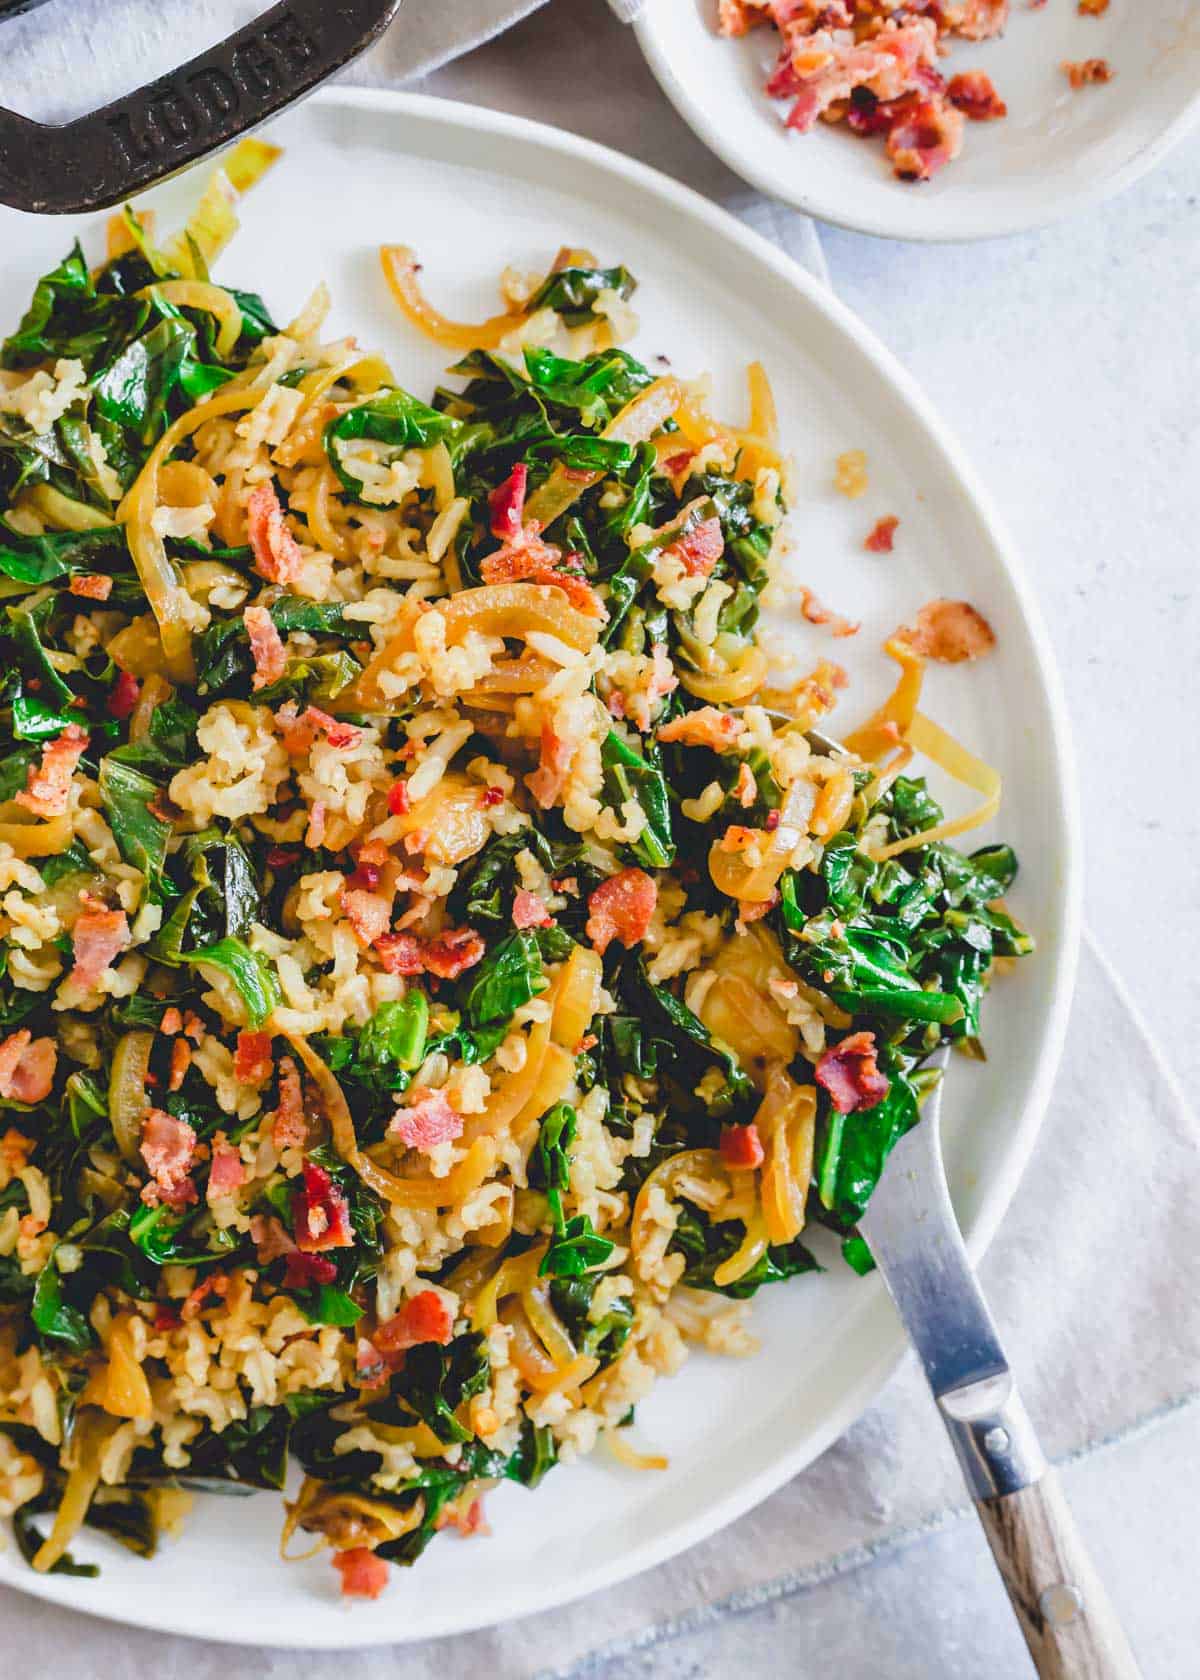 Sweet and spicy collard greens side dish recipe on a white plate.